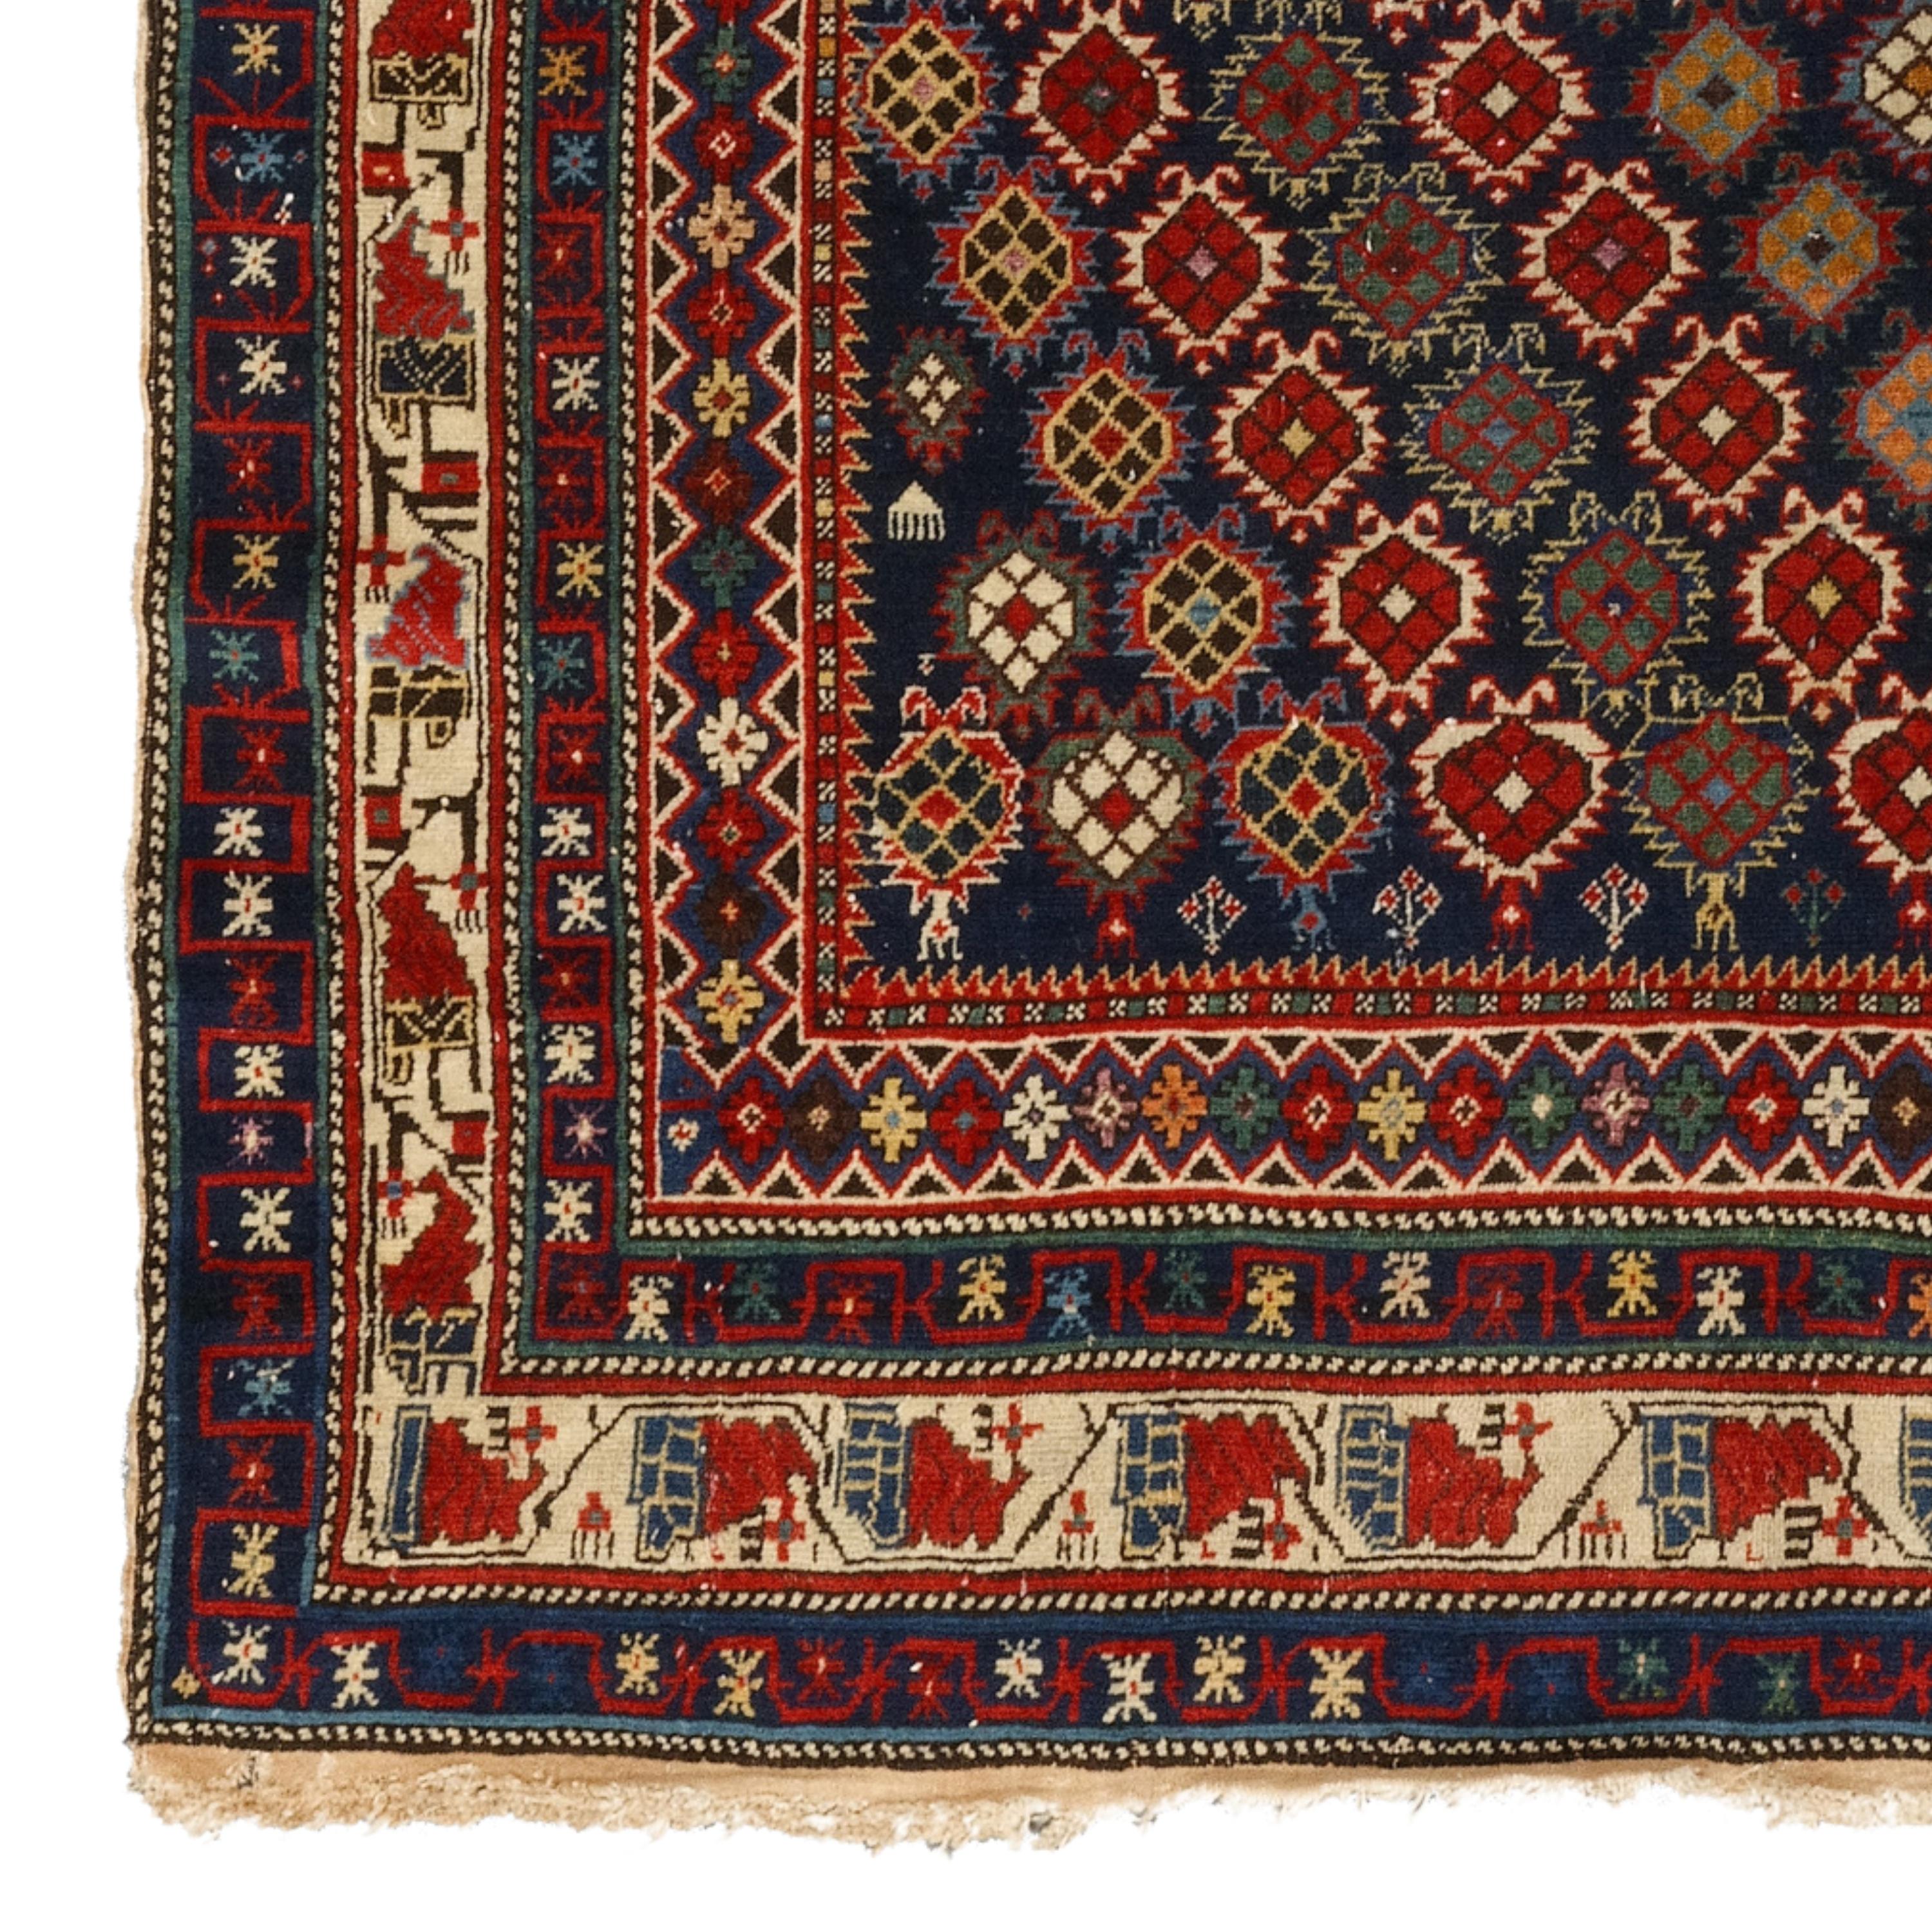 Late of the 19th Century Caucasian Prayer Marasali Rug
Size : 115 x 143 cm

This impressive late 19th-century Caucasian Marashali Carpet is a masterpiece reflecting the elegant and sophisticated craftsmanship of a historic period.

Rich Patterns: